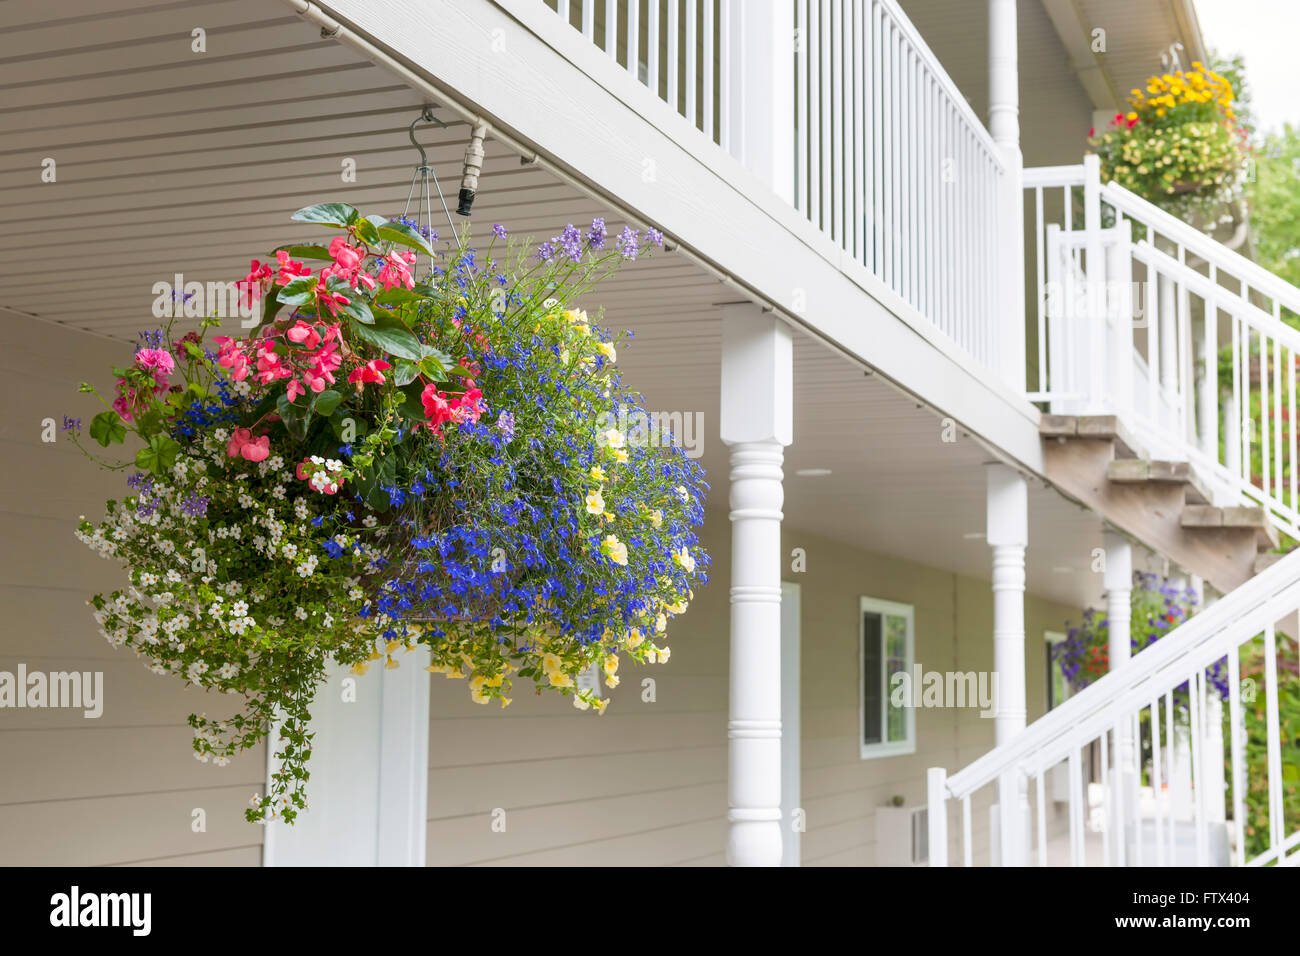 Colorful hanging flower basket decorating house exterior with copy space Stock Photo